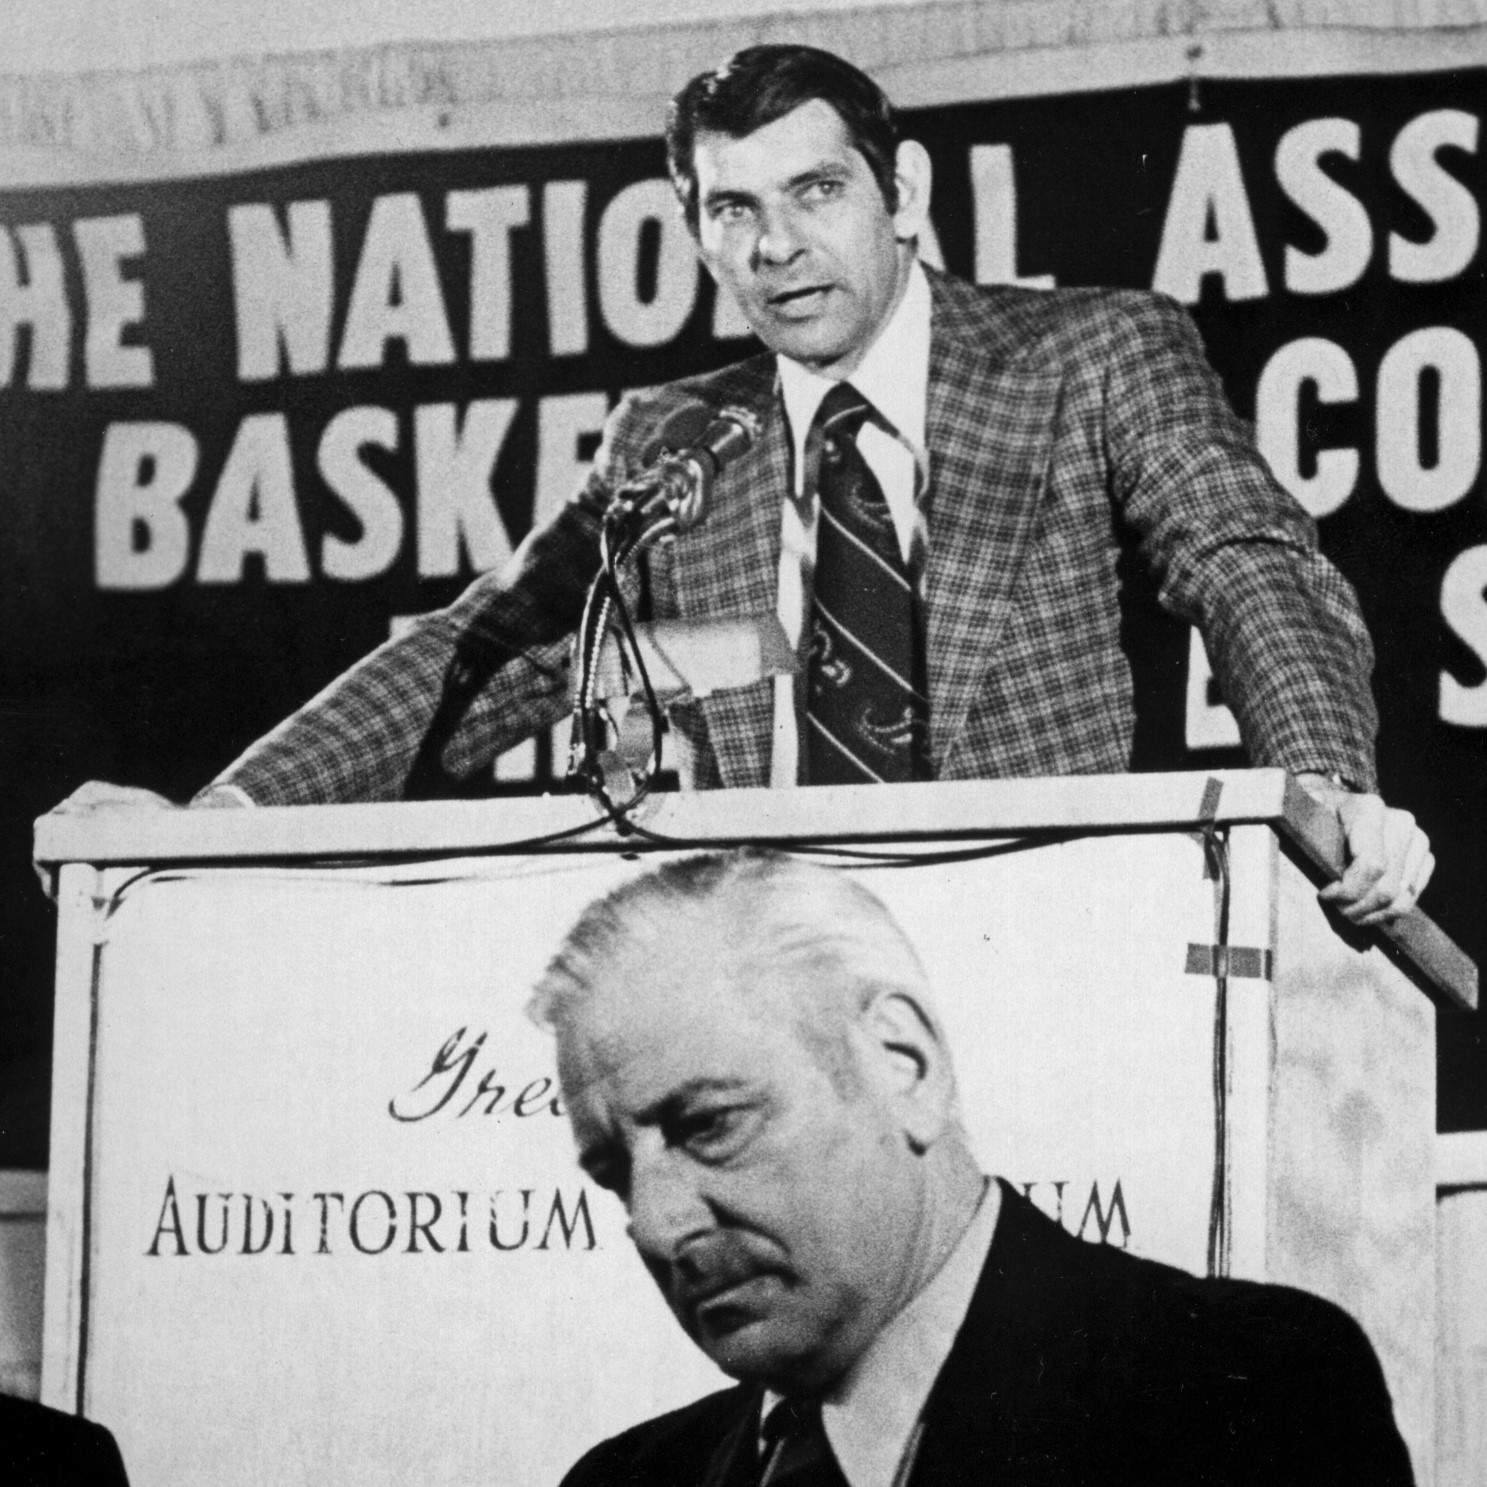 A man in a suit stands behind a podium, giving a speech